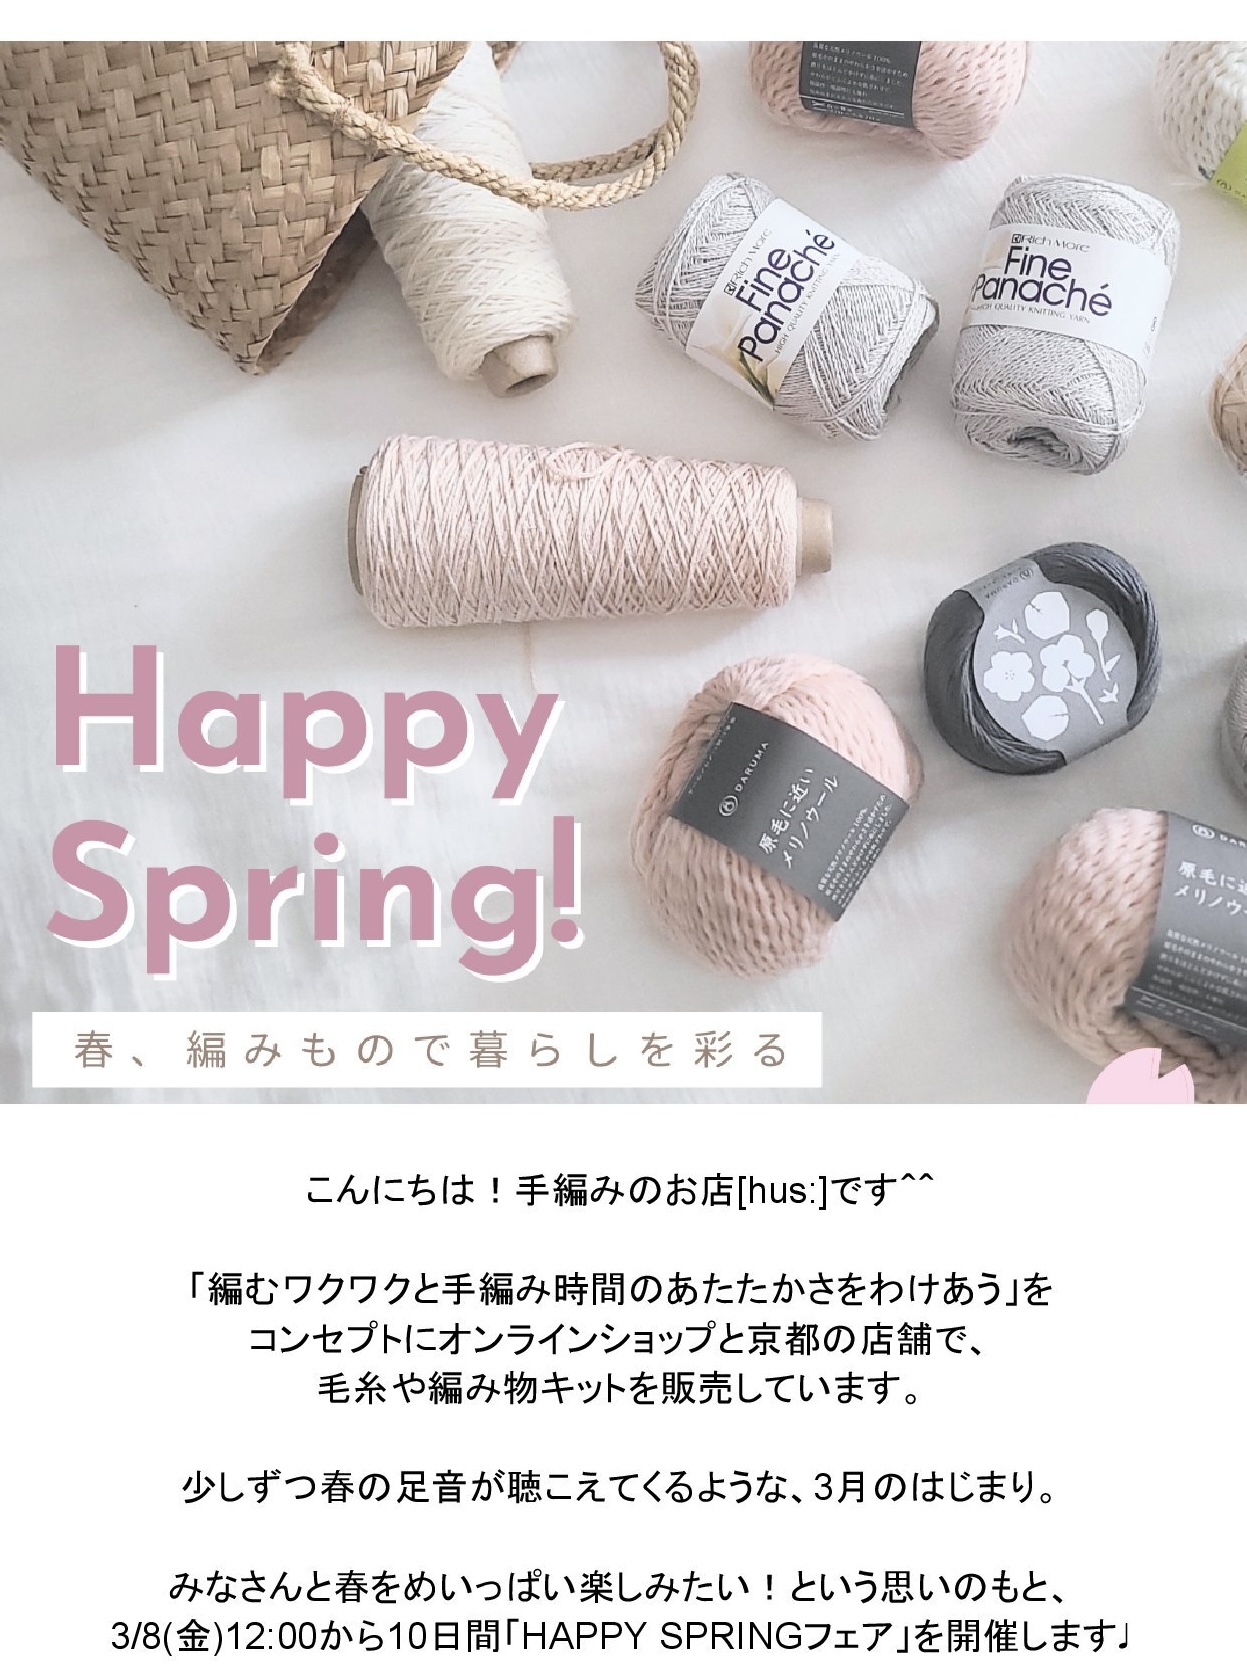 HAPPY SPRINGフェア好評開催中！